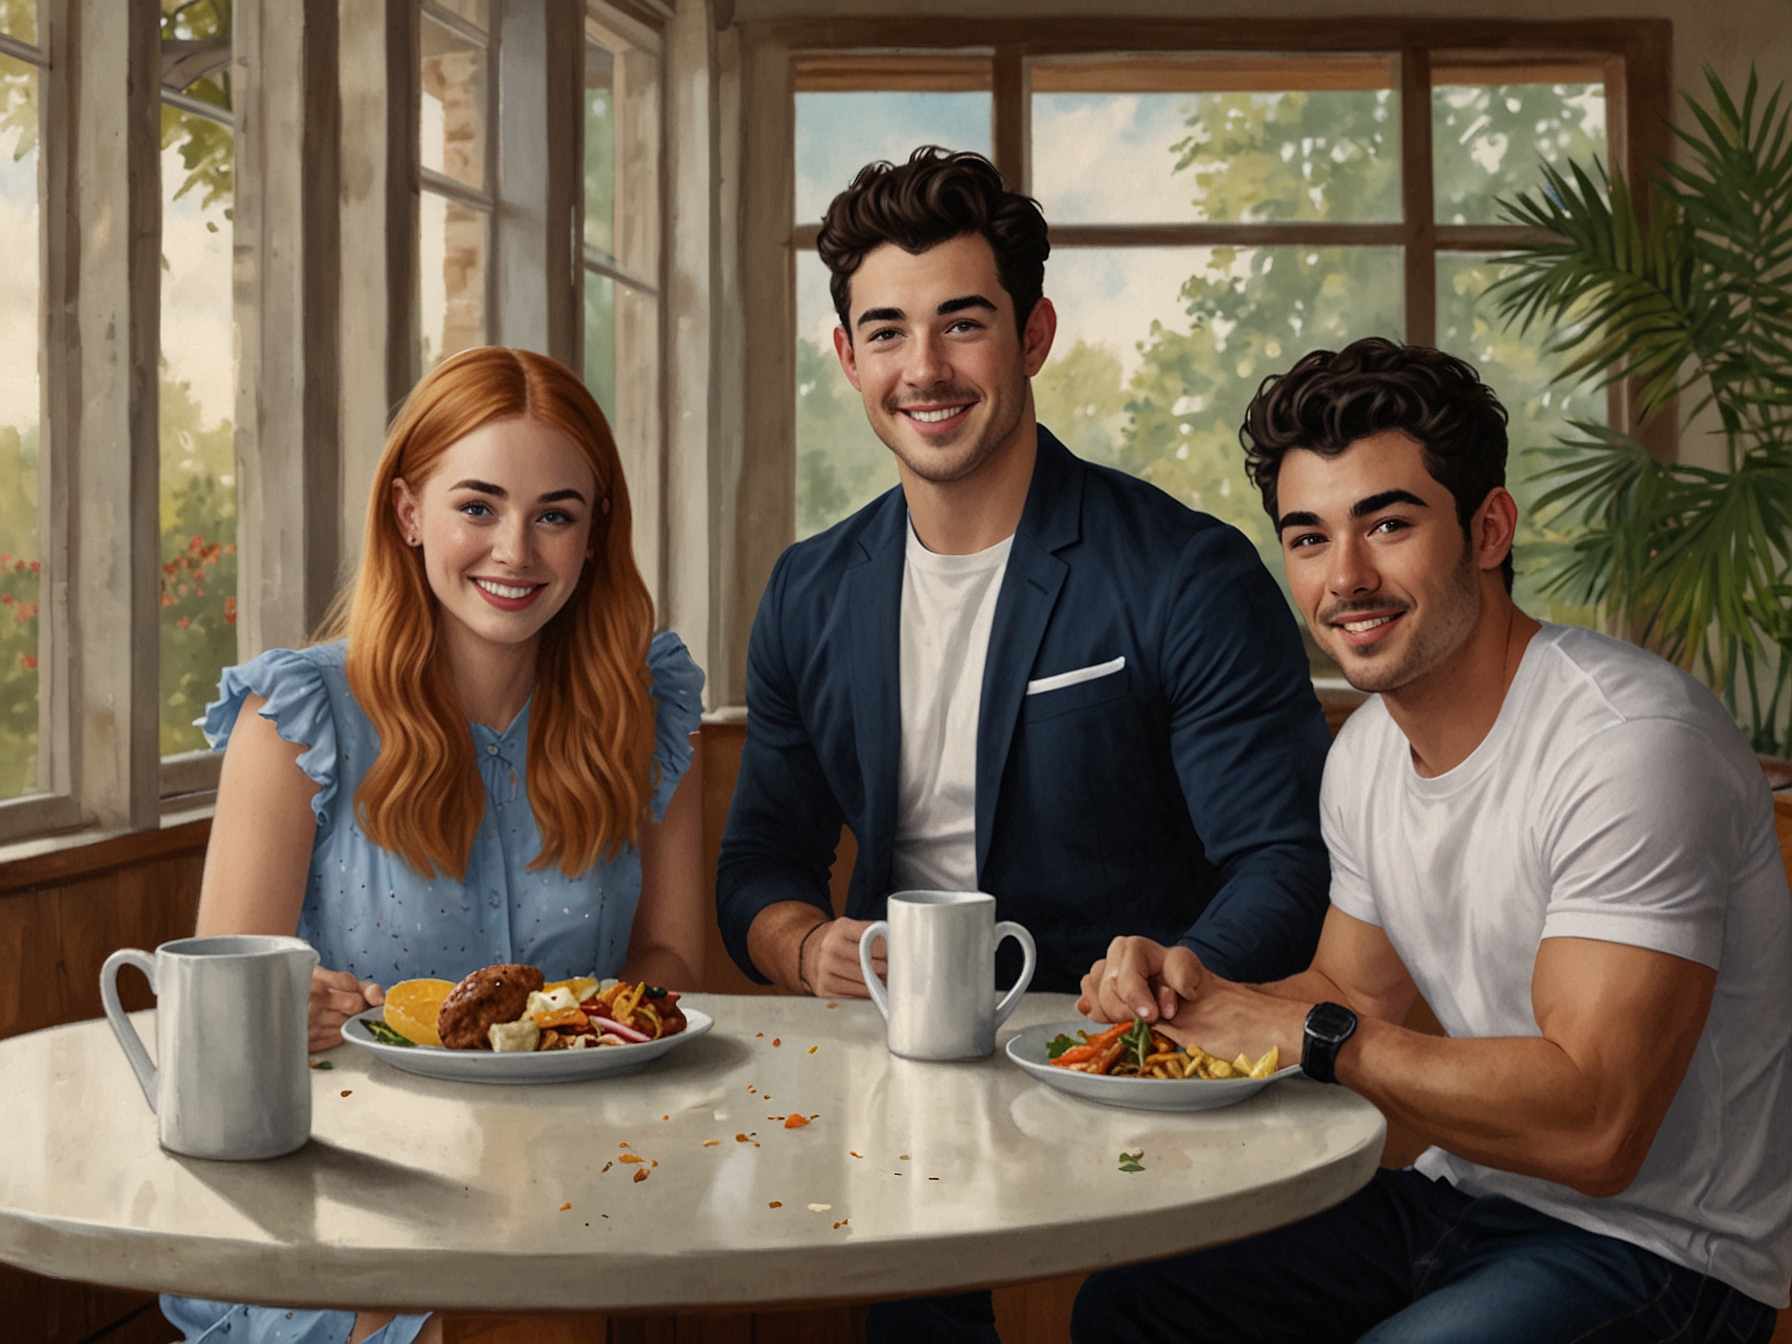 Nick and Kevin Jonas joining Sophie Turner and Joe Jonas for lunch, creating a supportive environment, emphasizing the strong family dynamics and commitment to co-parenting.